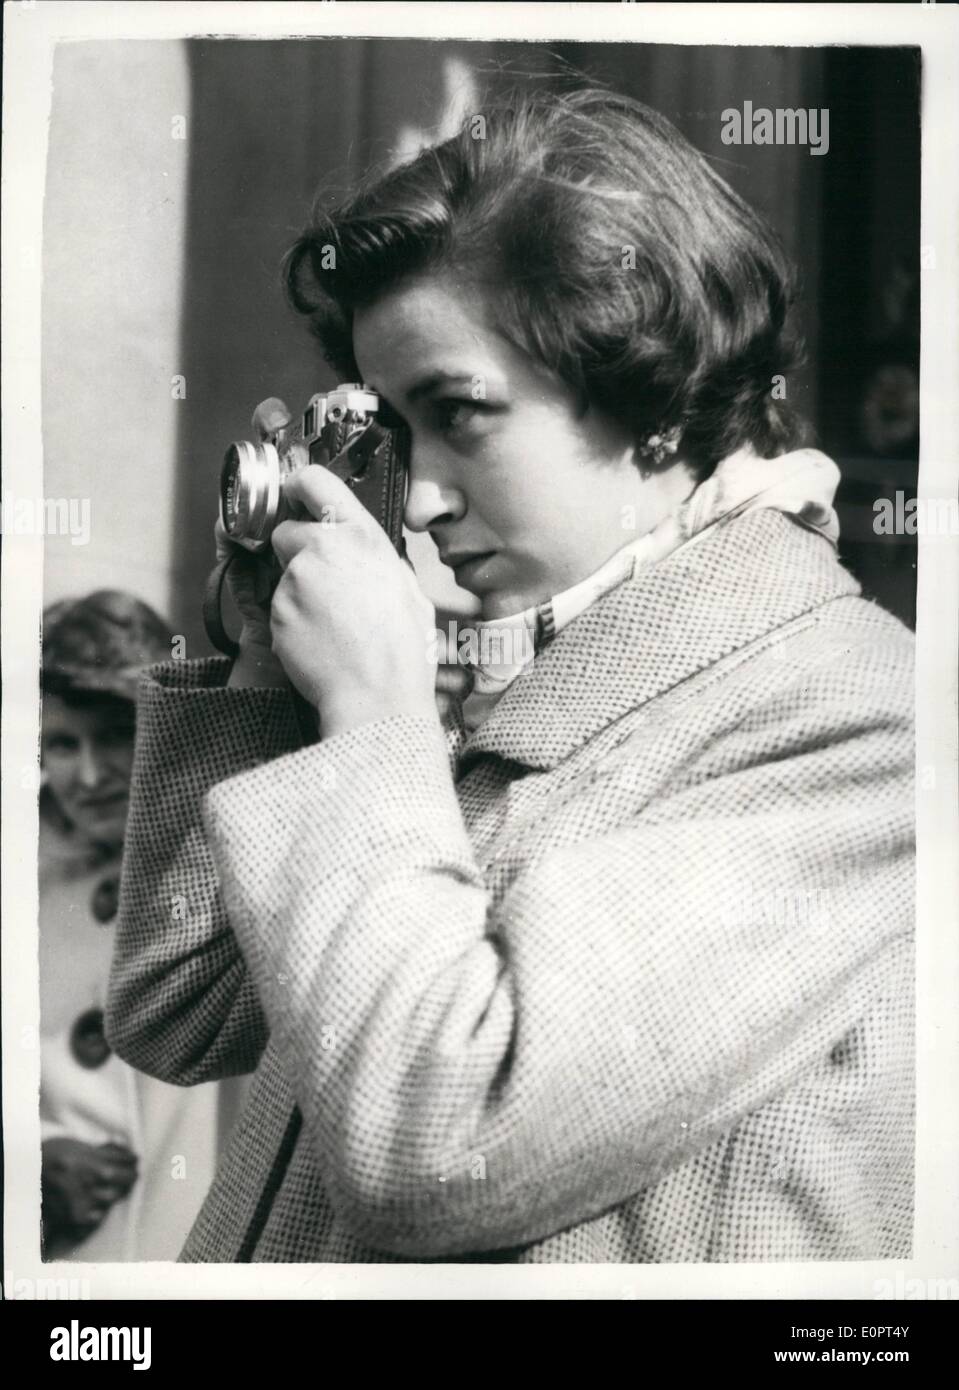 Feb. 02, 1957 - New American Ambassador Presents Oredentials. Mr. John Hay Whitney, the new American Ambassador to Britain, went to Buckingham Palace today to present his ordentials. Photo shows Photographing the scene at the Embassy today, is Kate - Mrs. Whitney's daughter by her former marriage to Mr. James Roosevelt. Stock Photo